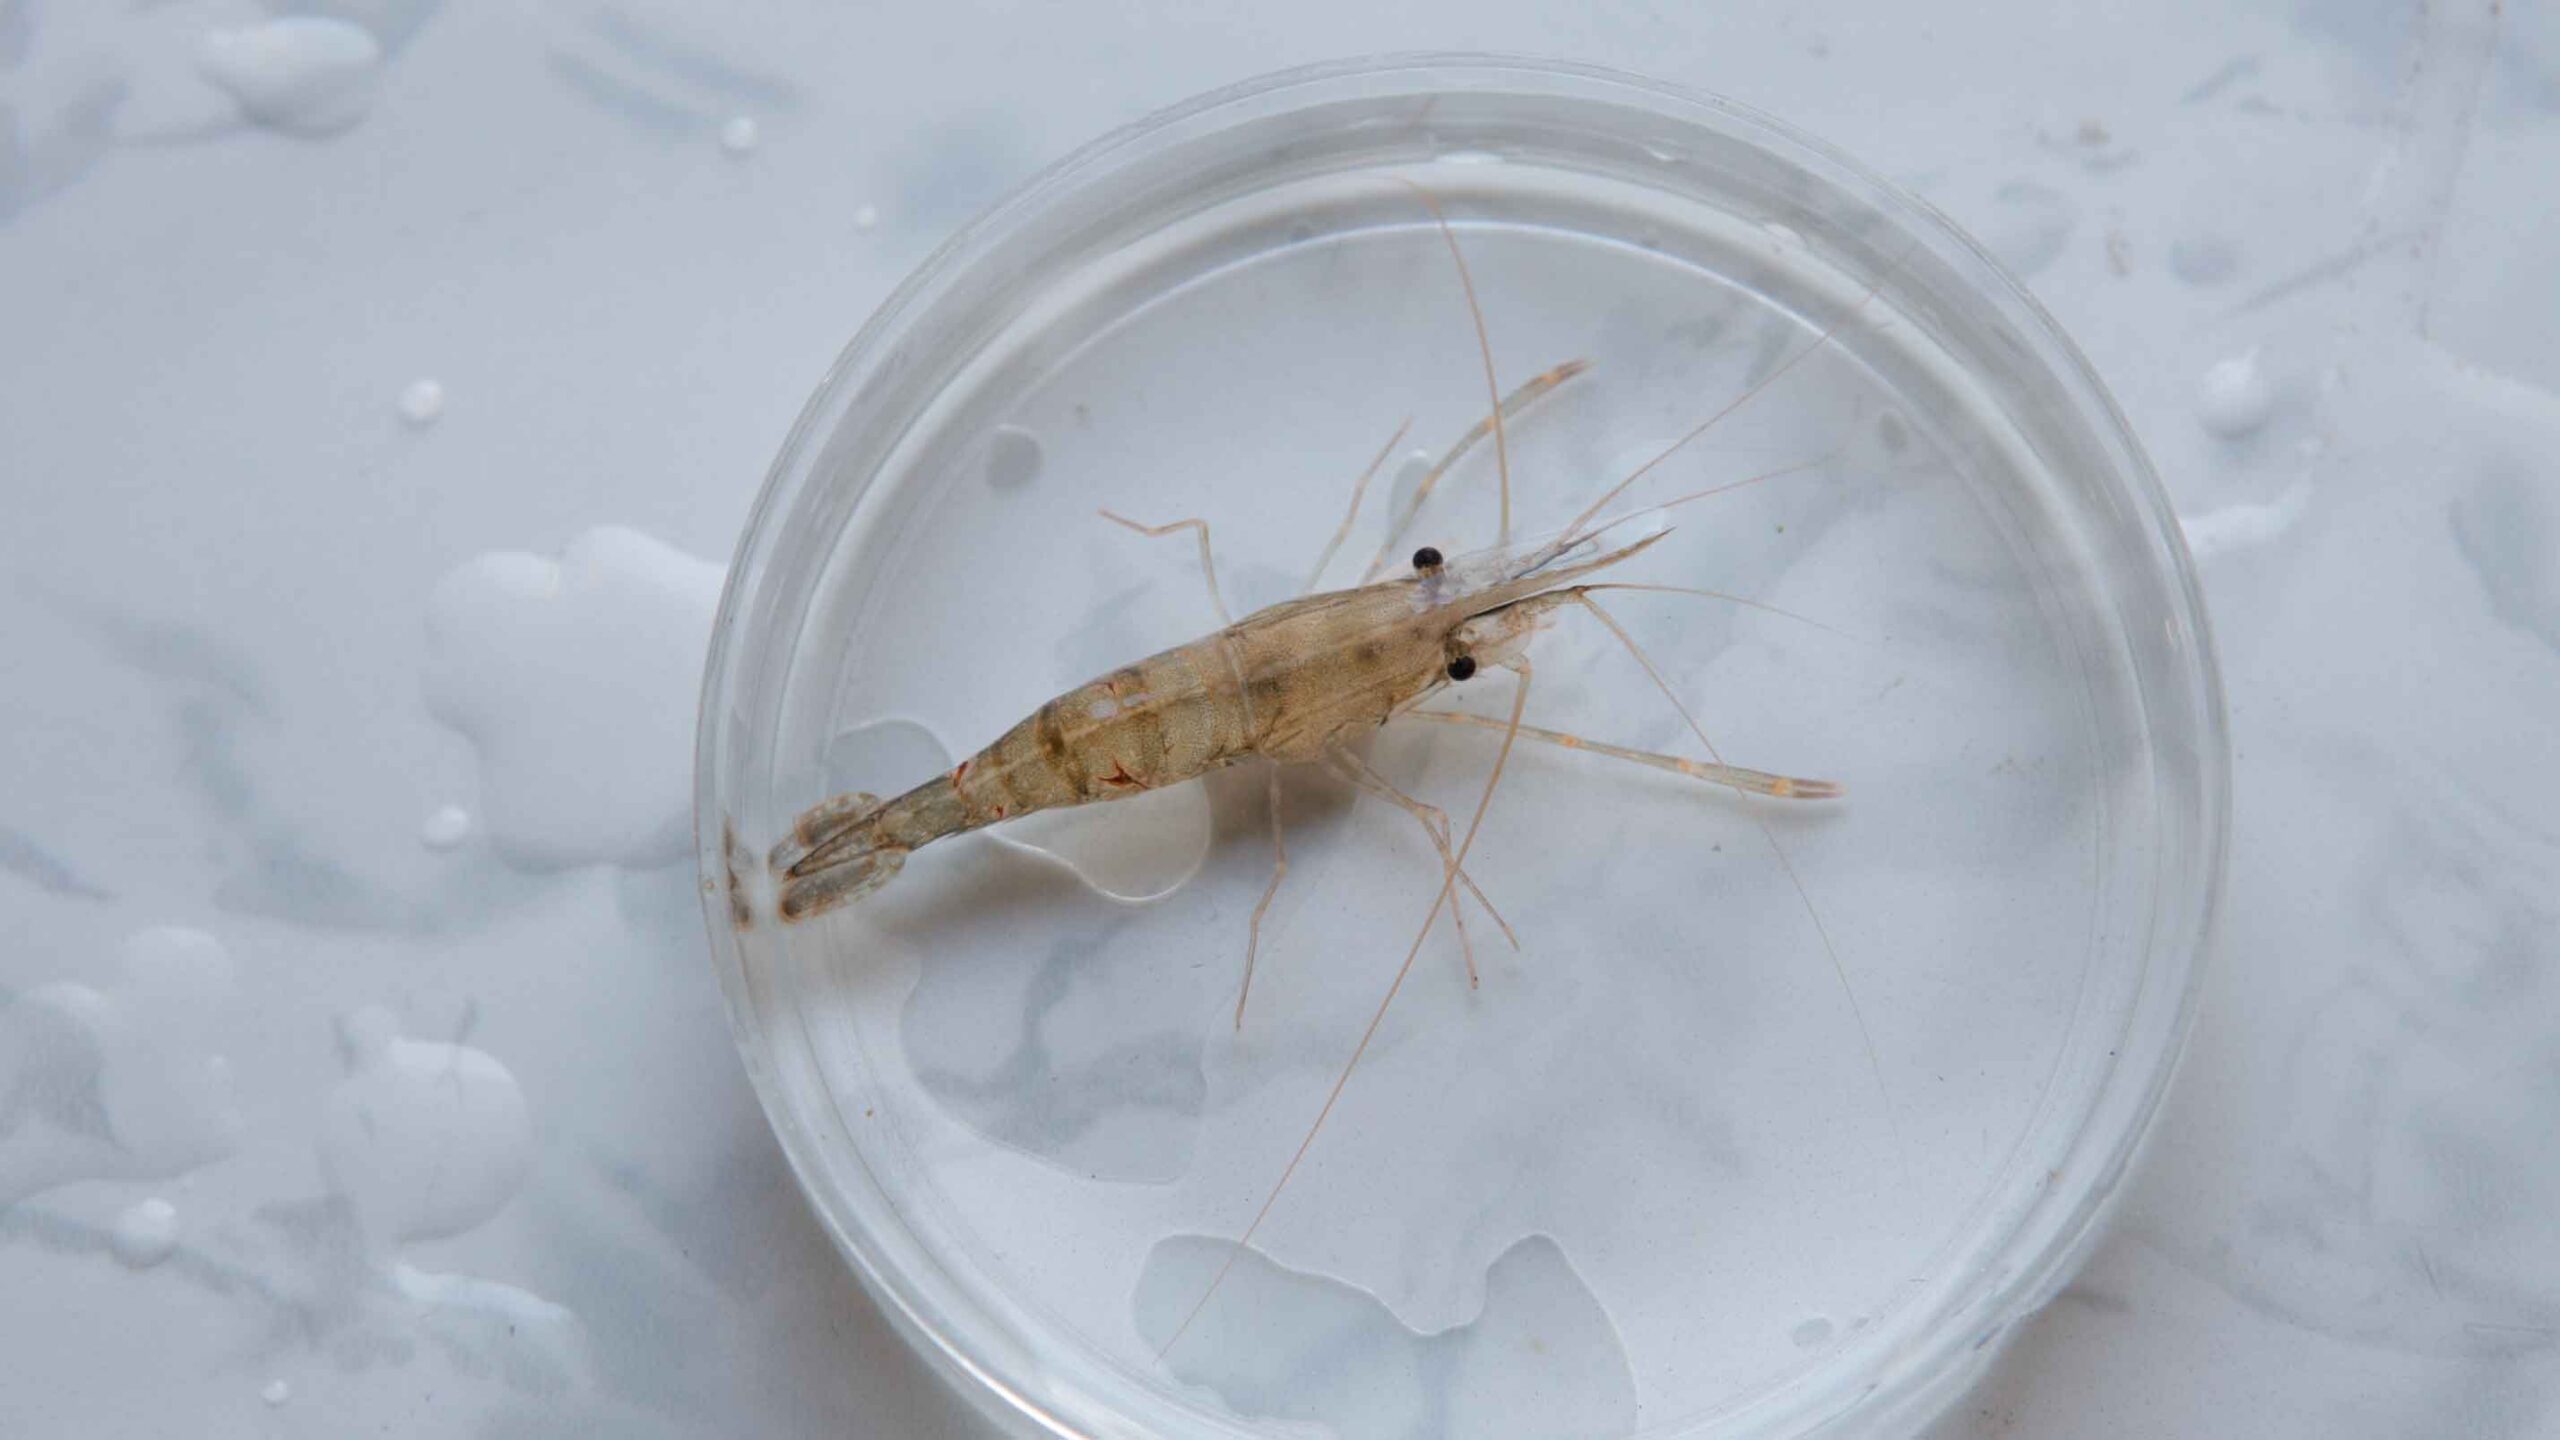 A grass shrimp with long antenna in a glass circle plate